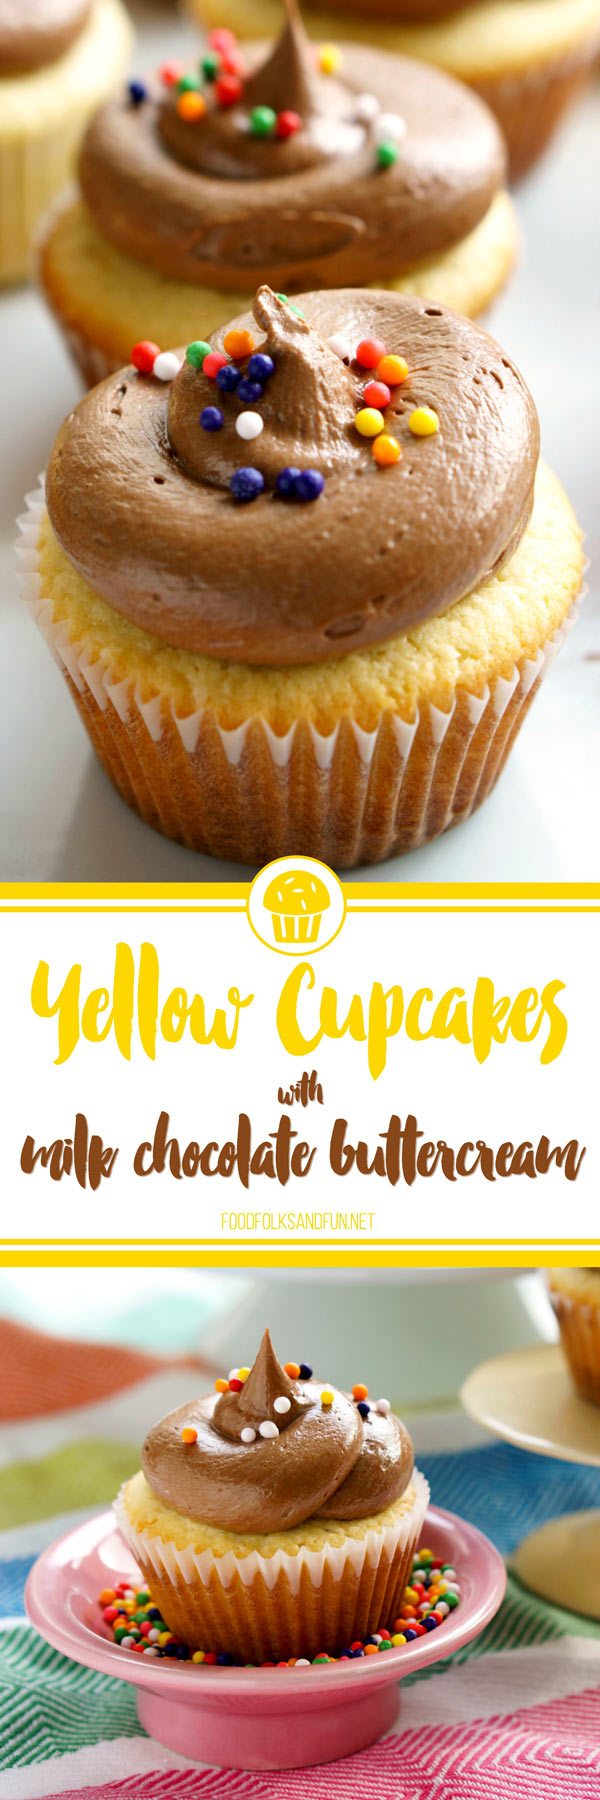 These Yellow Cupcakes with Milk Chocolate Buttercream are just the dessert for any type of celebration: birthdays, the first day of school, awards, promotions, or simply just because! The yellow cake is rich and tender, and the buttercream tastes just like fudge! via @foodfolksandfun